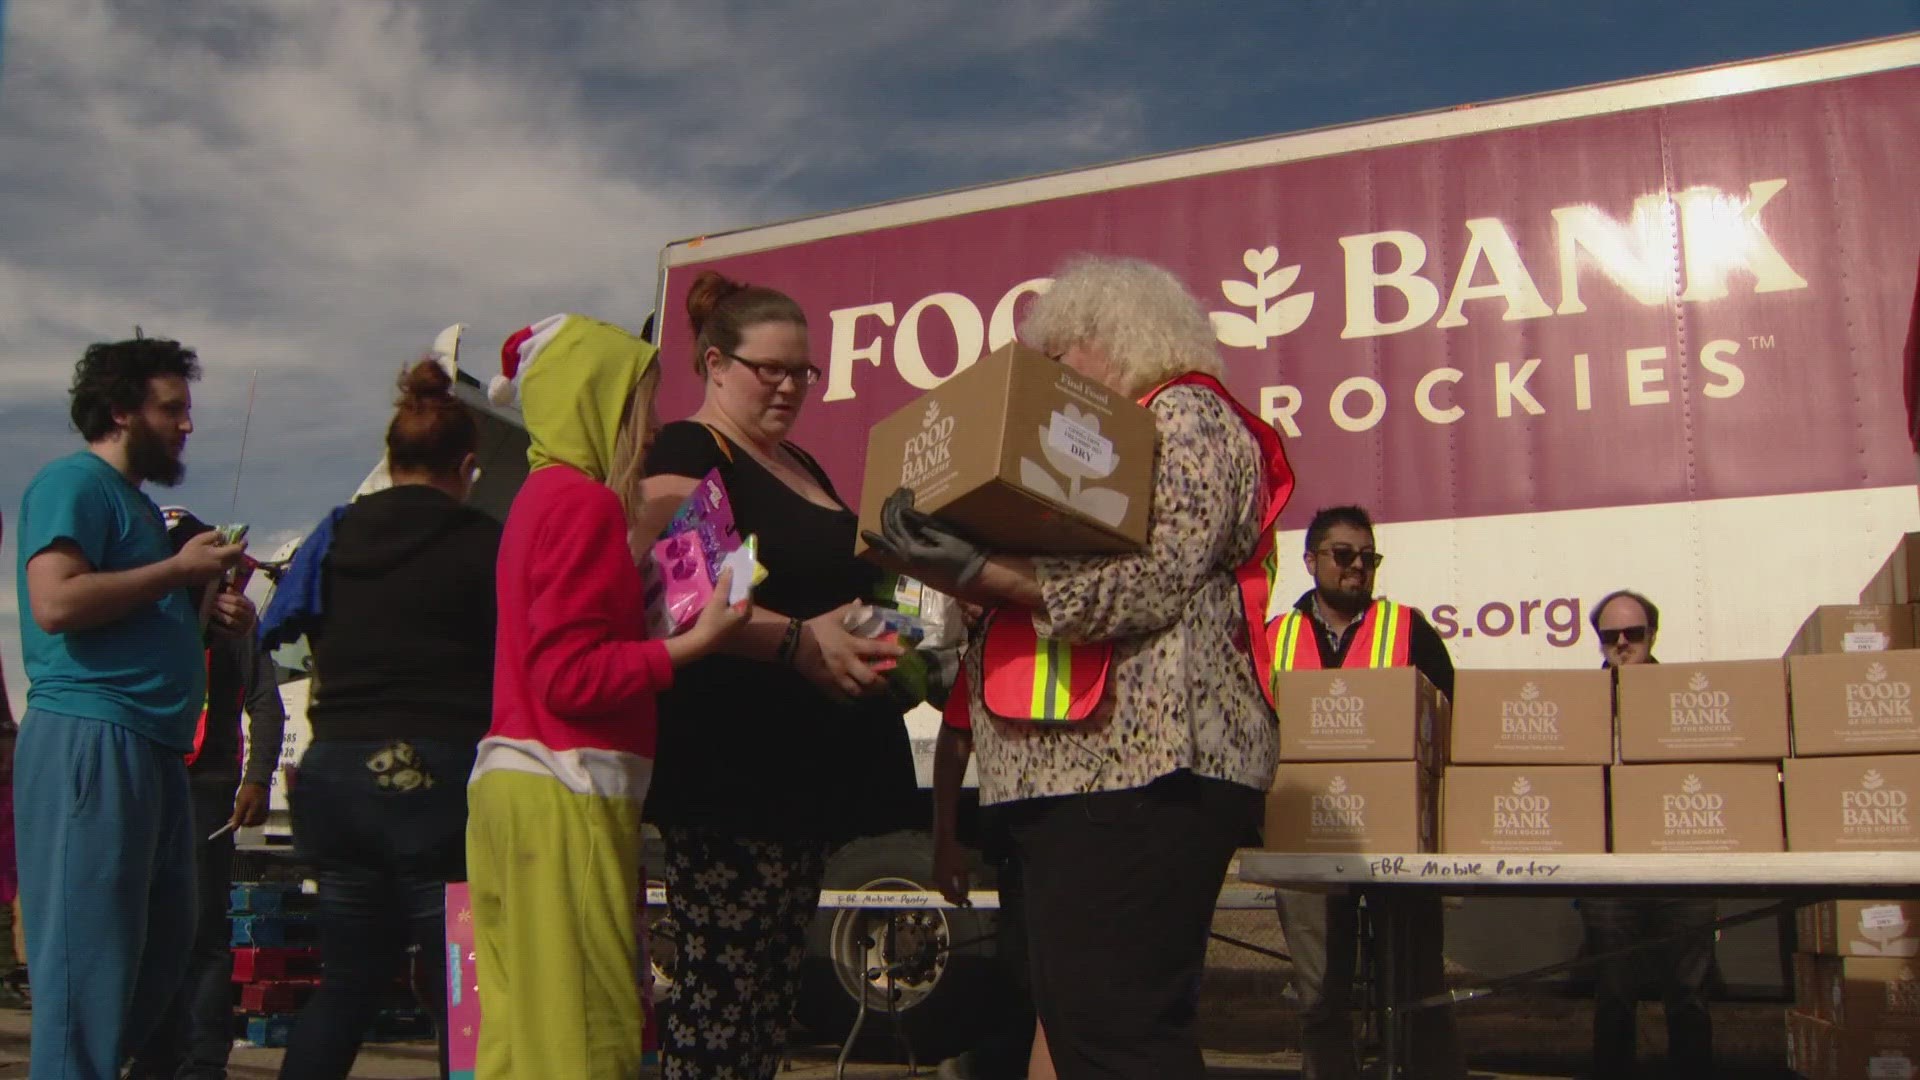 Operation Freebird is now in its 19th year.   The Adams County Sheriff's Office together with Food Bank of the Rockies supplies food to families for Thanksgiving.